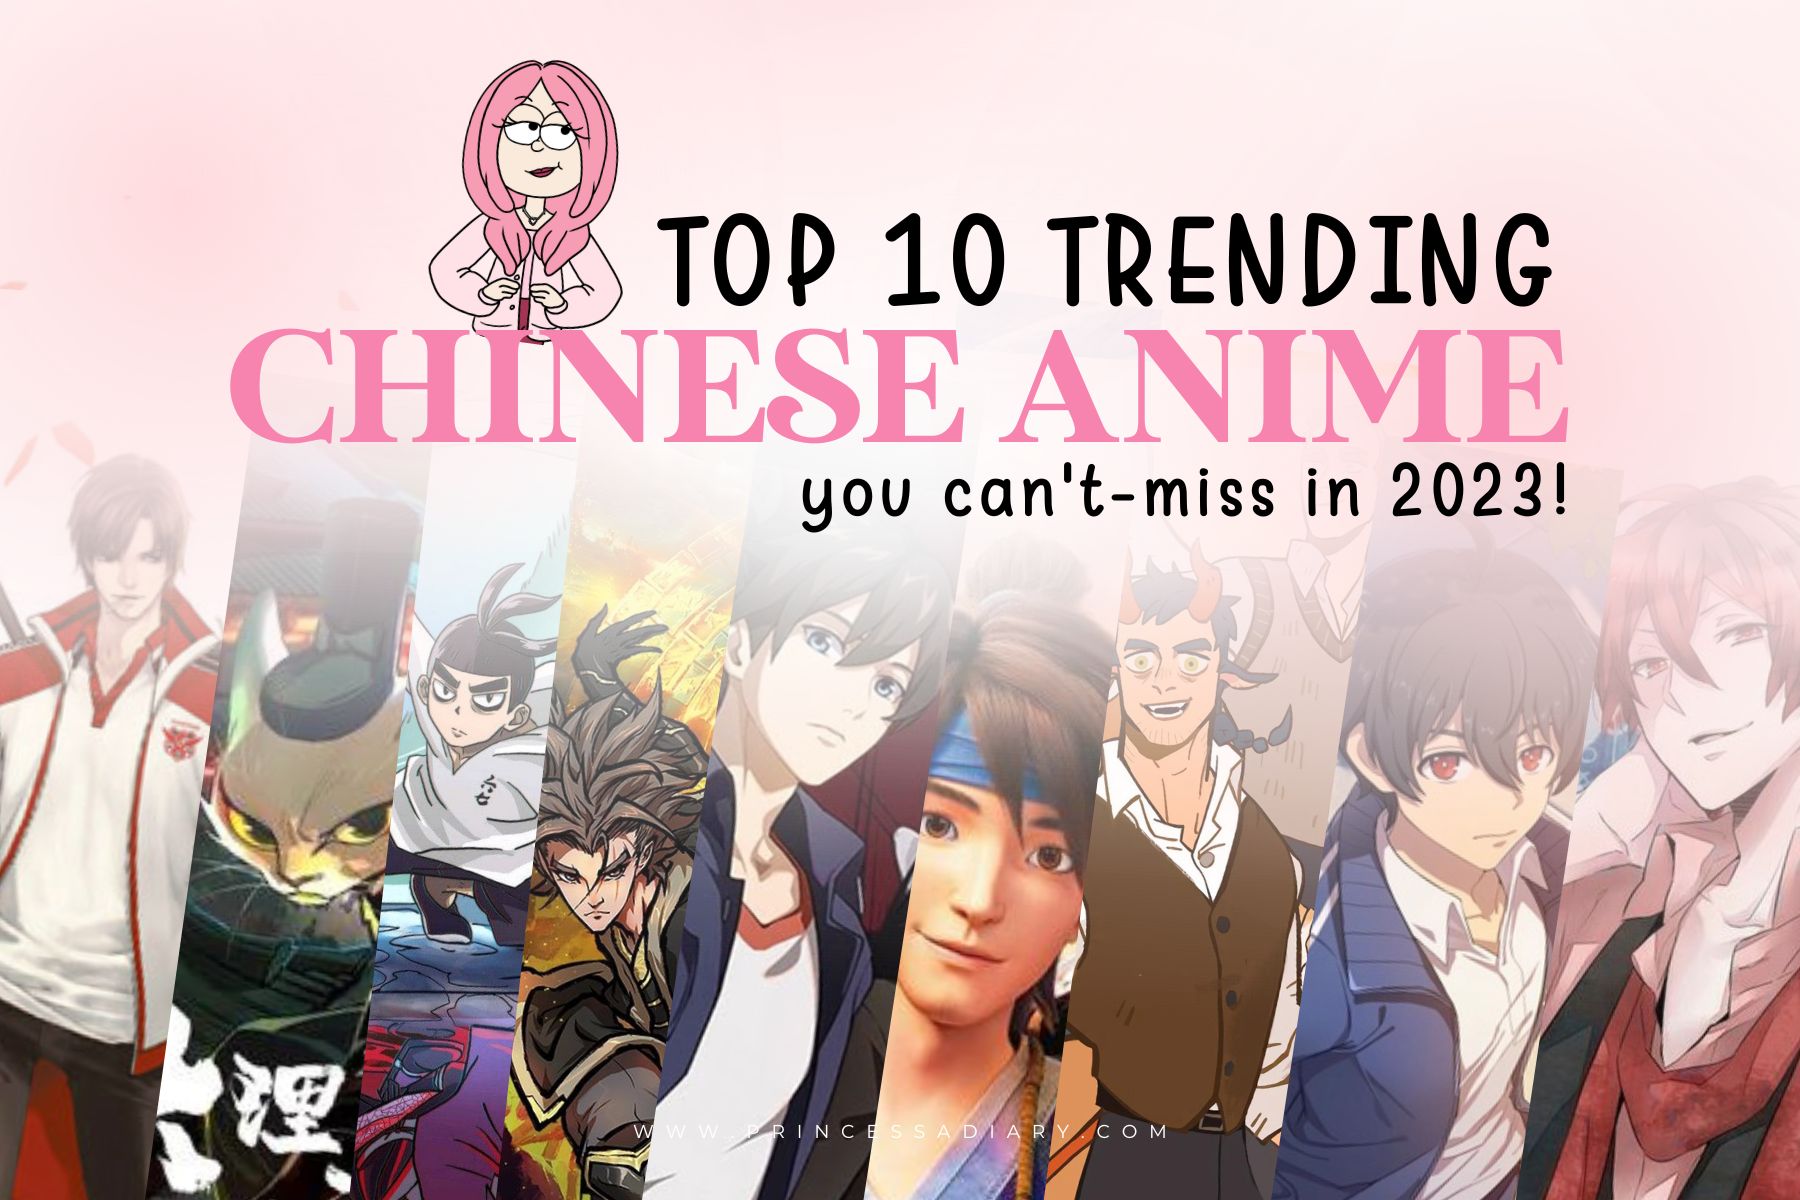 Top 10 trending donghua you can't-miss in 2023!